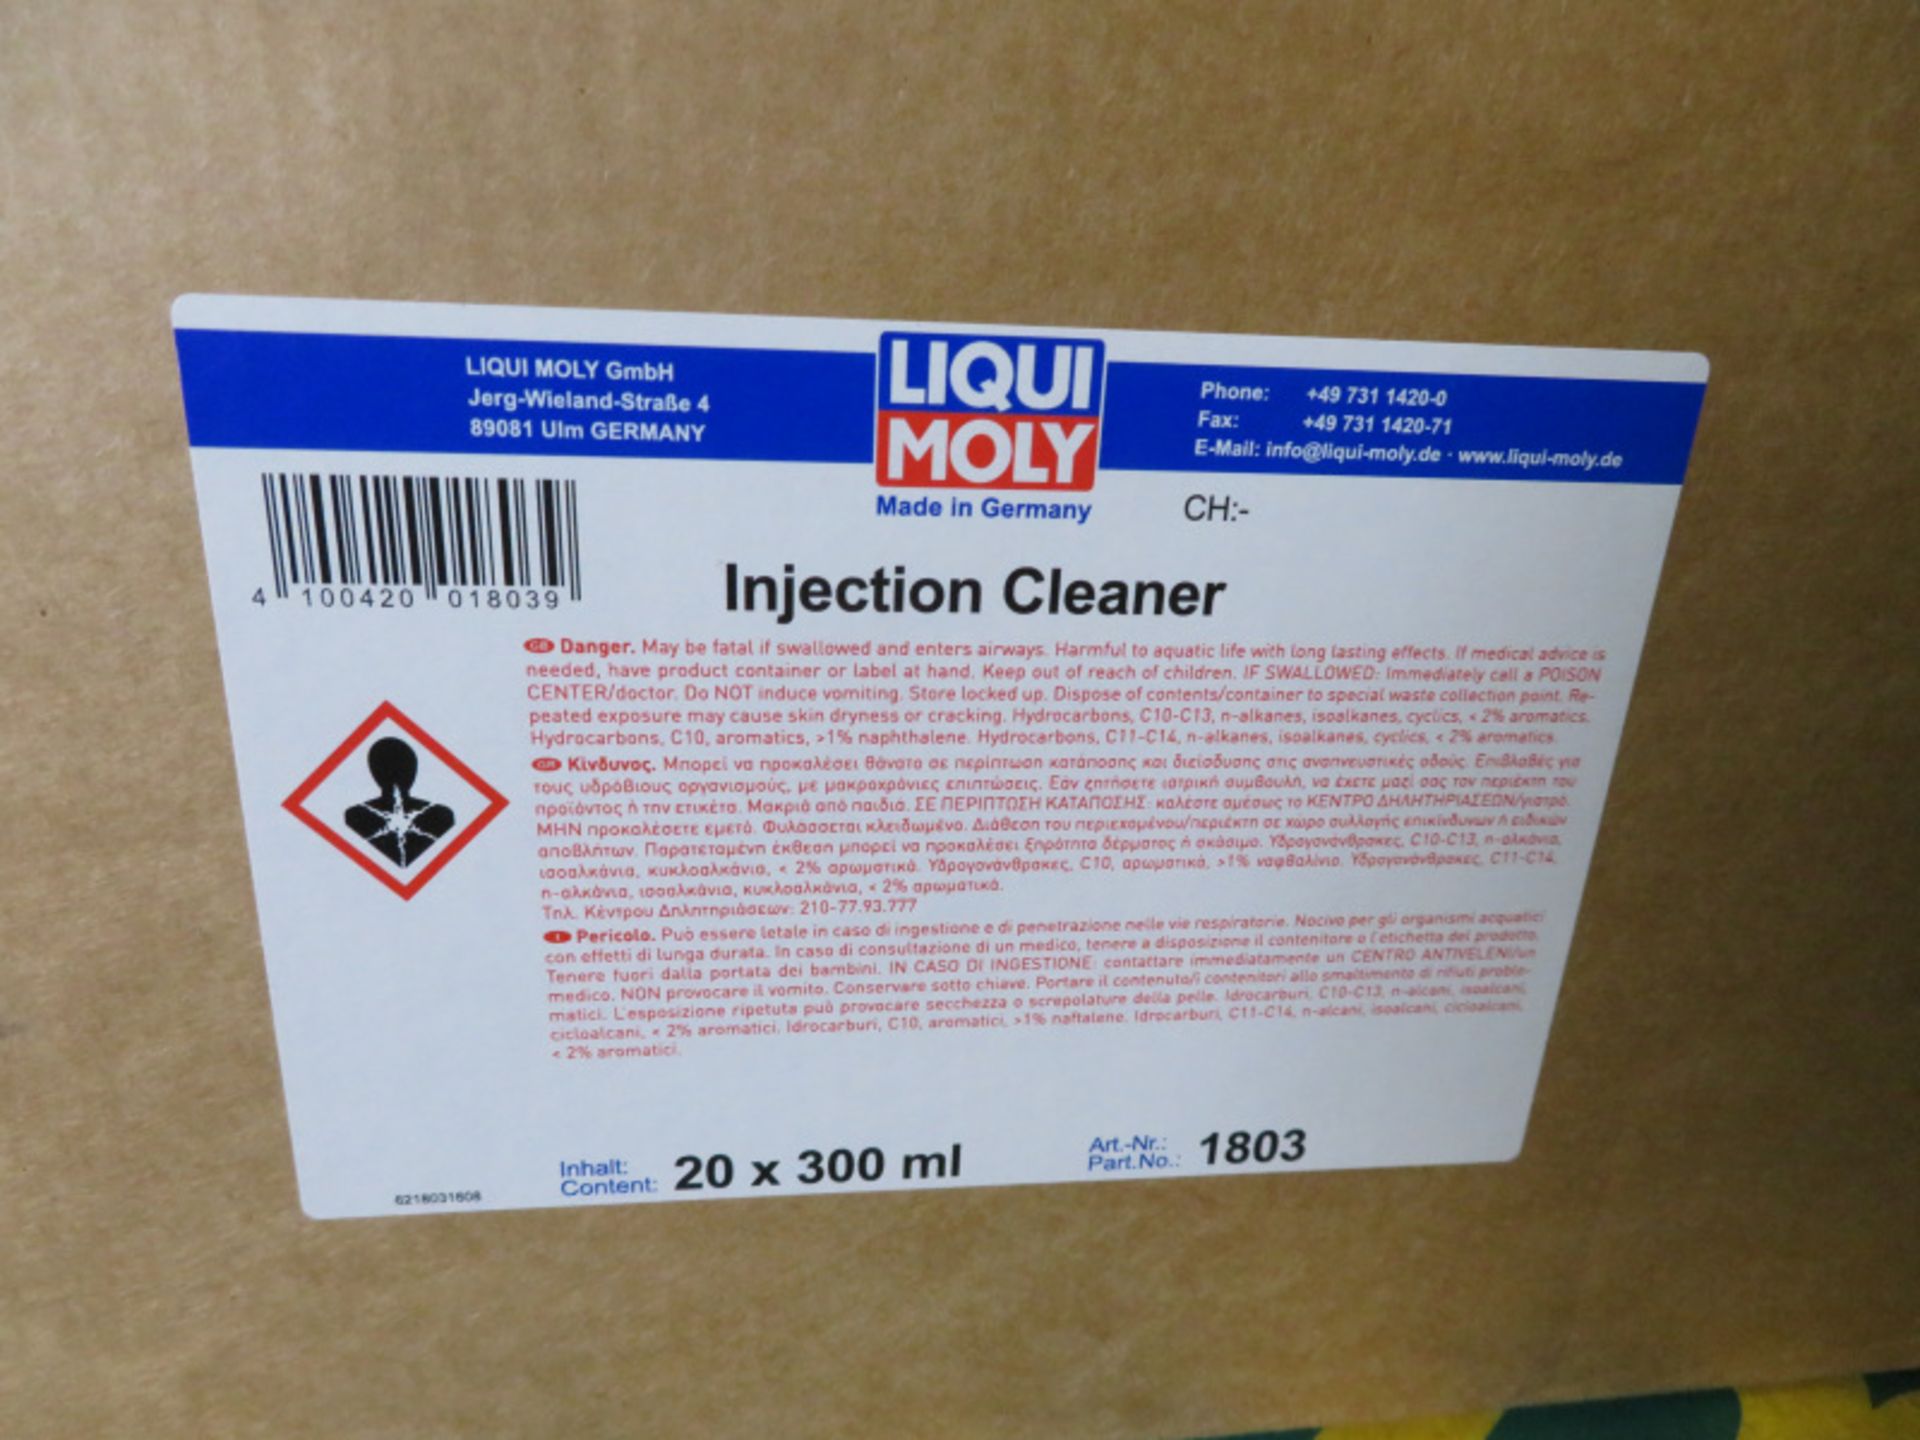 Liqui Moly fuel injection cleaner, Liqui Moly engine flush plus, Liqui Moly injection cleaner - Image 7 of 7